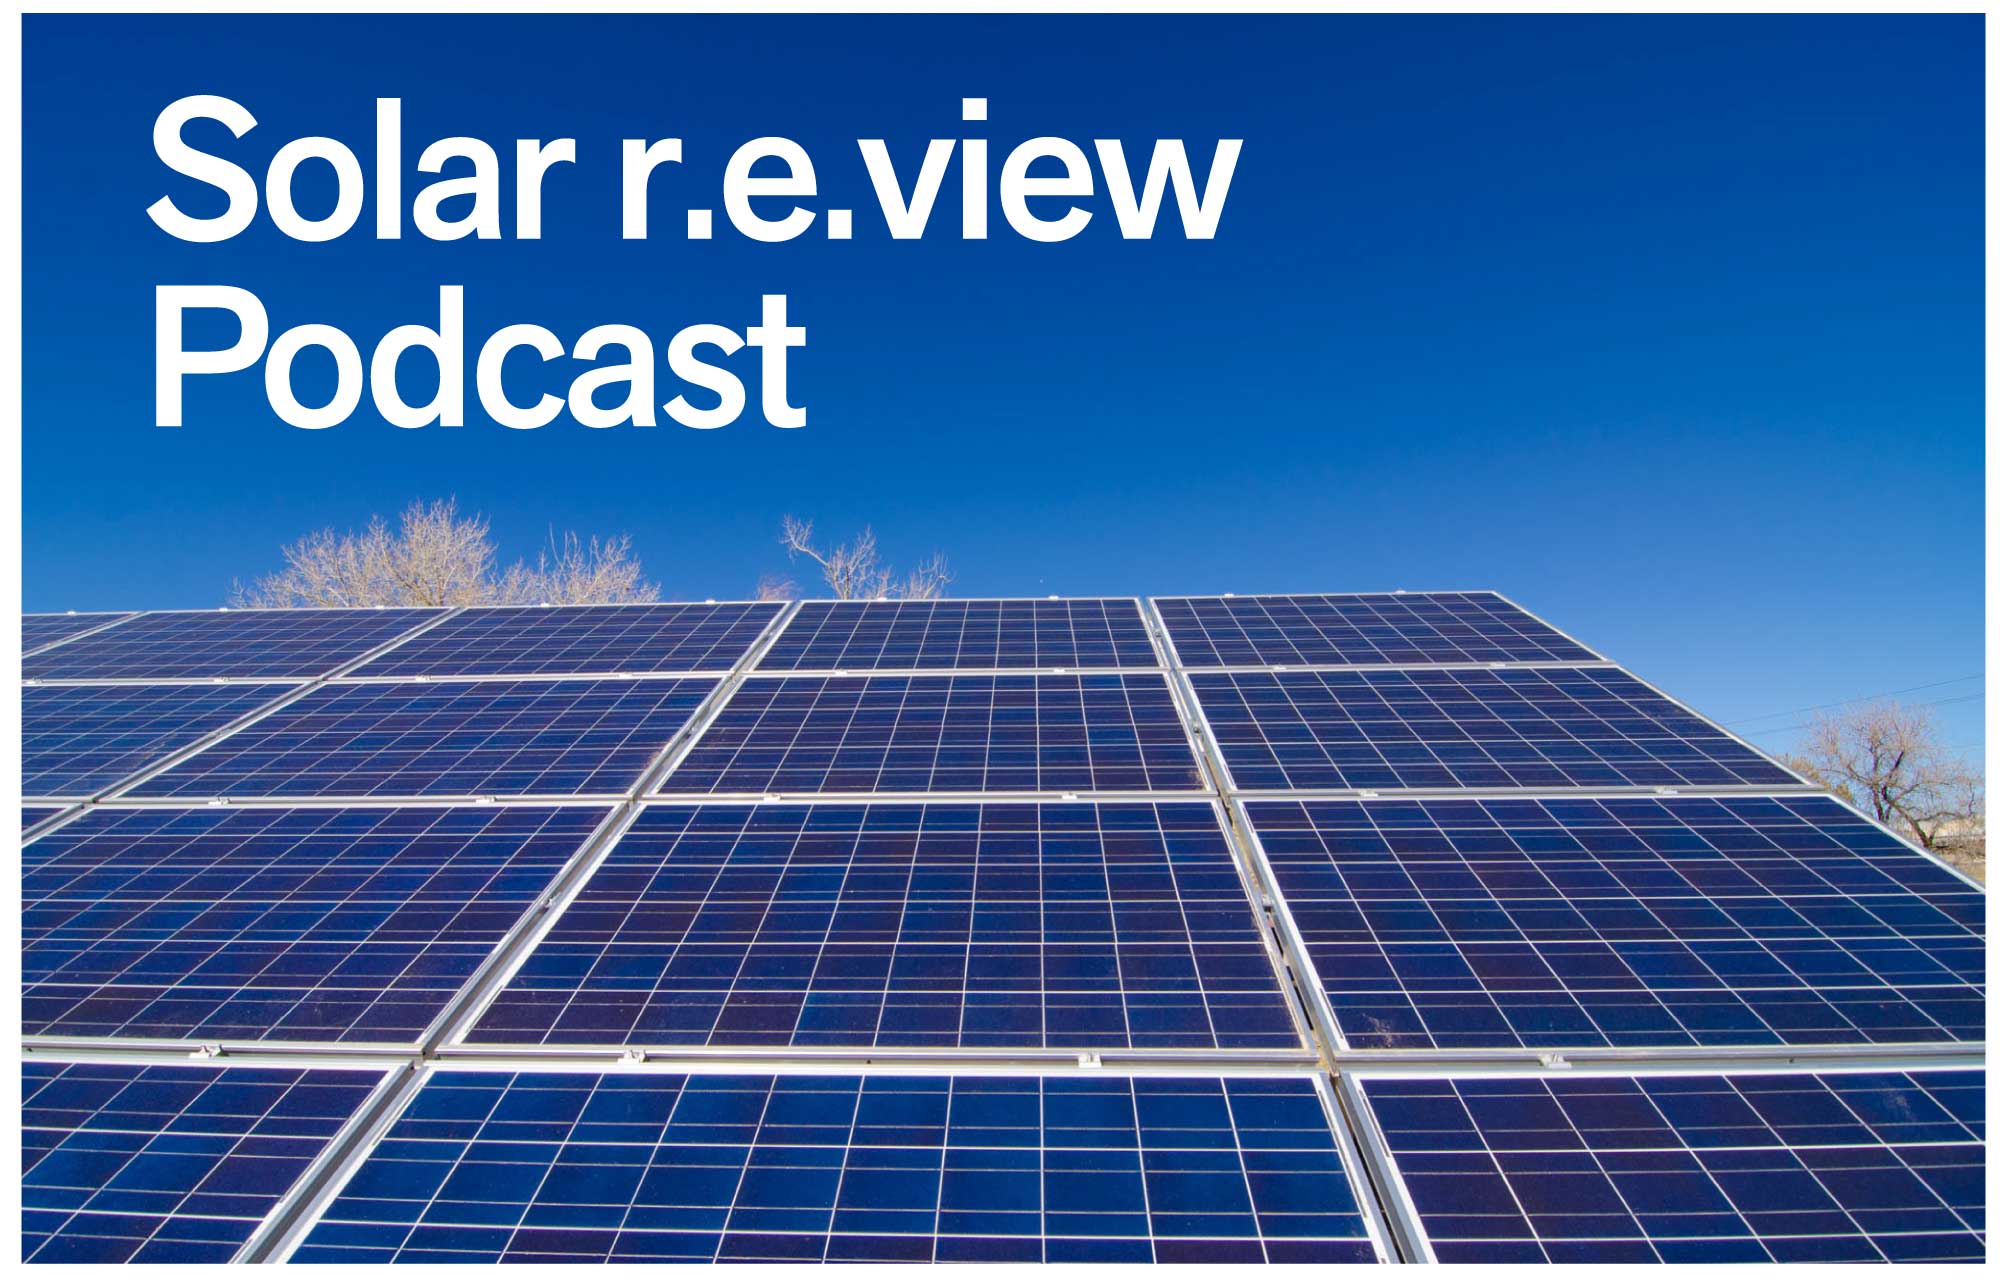 Will Reduction in Chinese Demand for PV Modules Really Cause a 30% Price Drop? – Follow Up Podcast